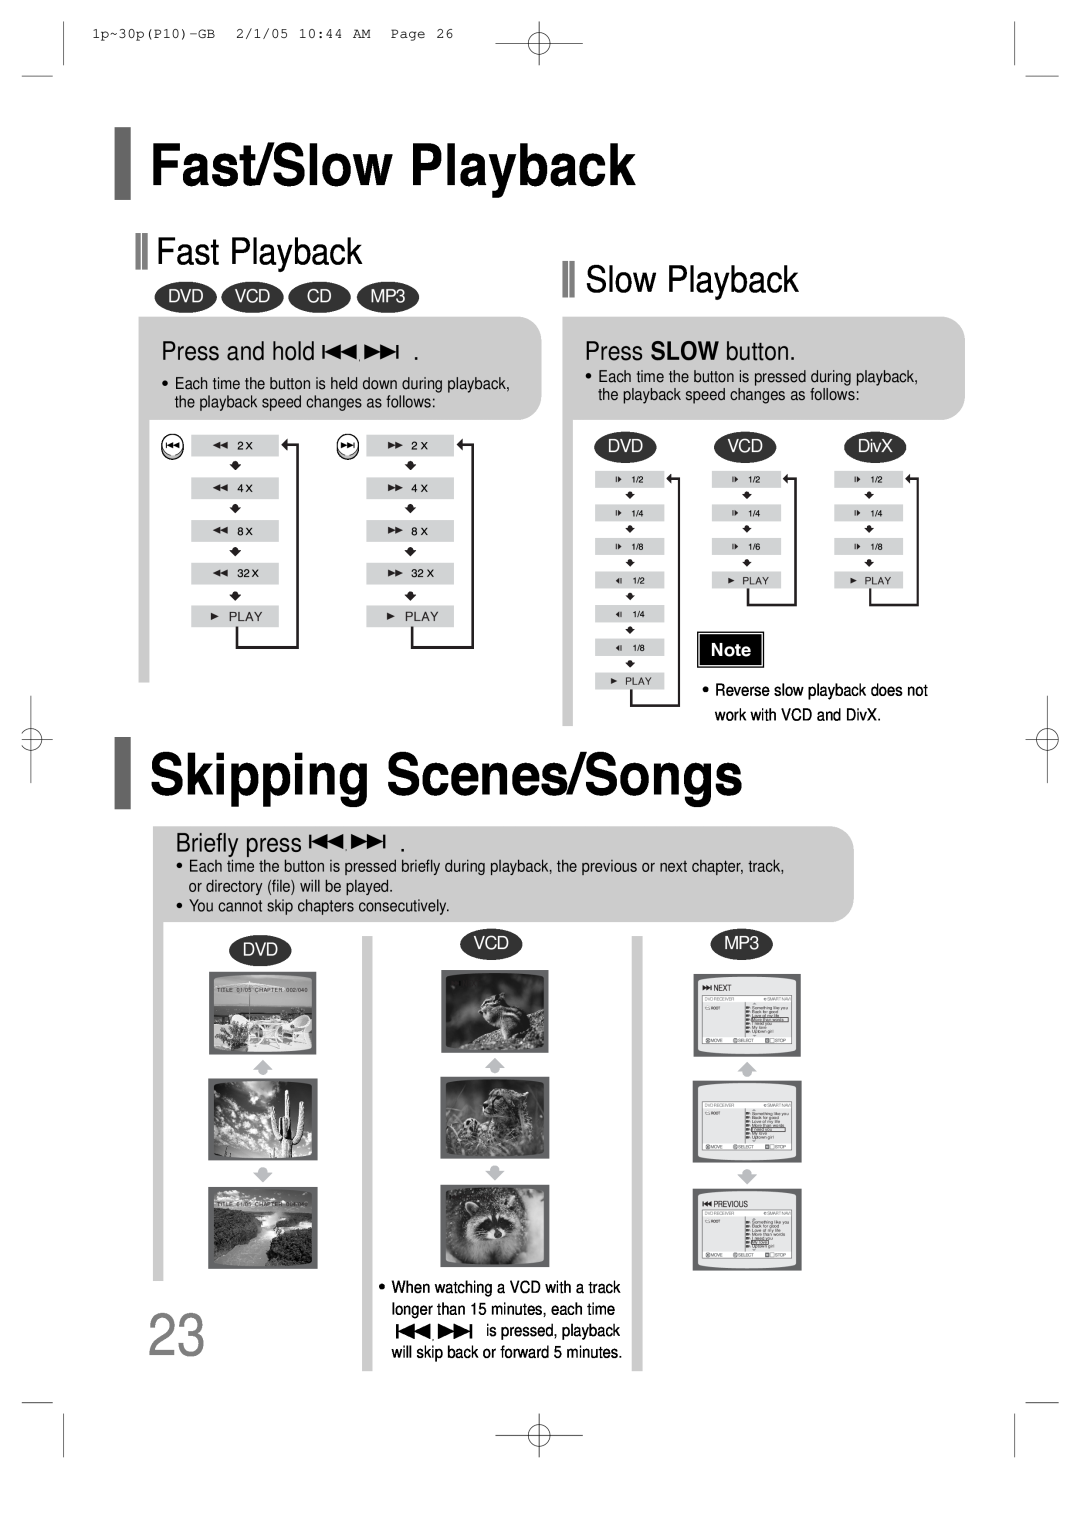 Samsung P10 Fast/Slow Playback, Skipping Scenes/Songs, Fast Playback, Press and hold, Press SLOW button, Briefly press 